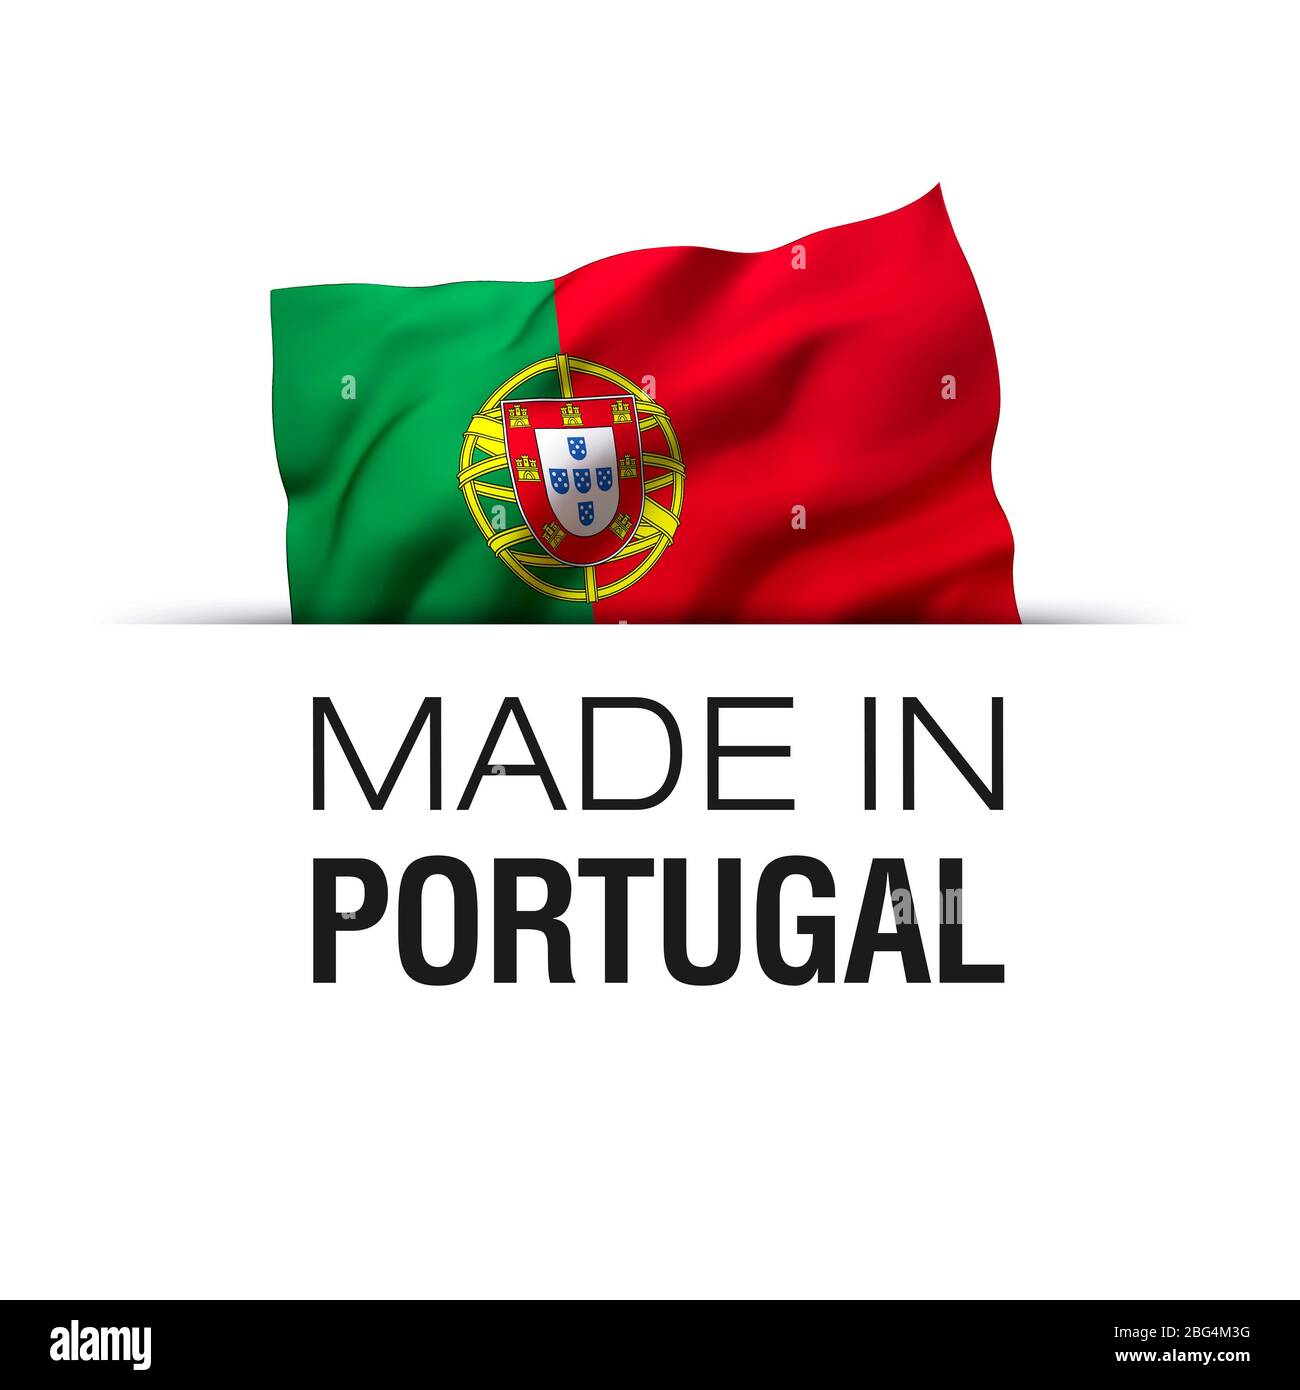 Made in Portugal - Guarantee label with a waving Portuguese flag. Stock Photo